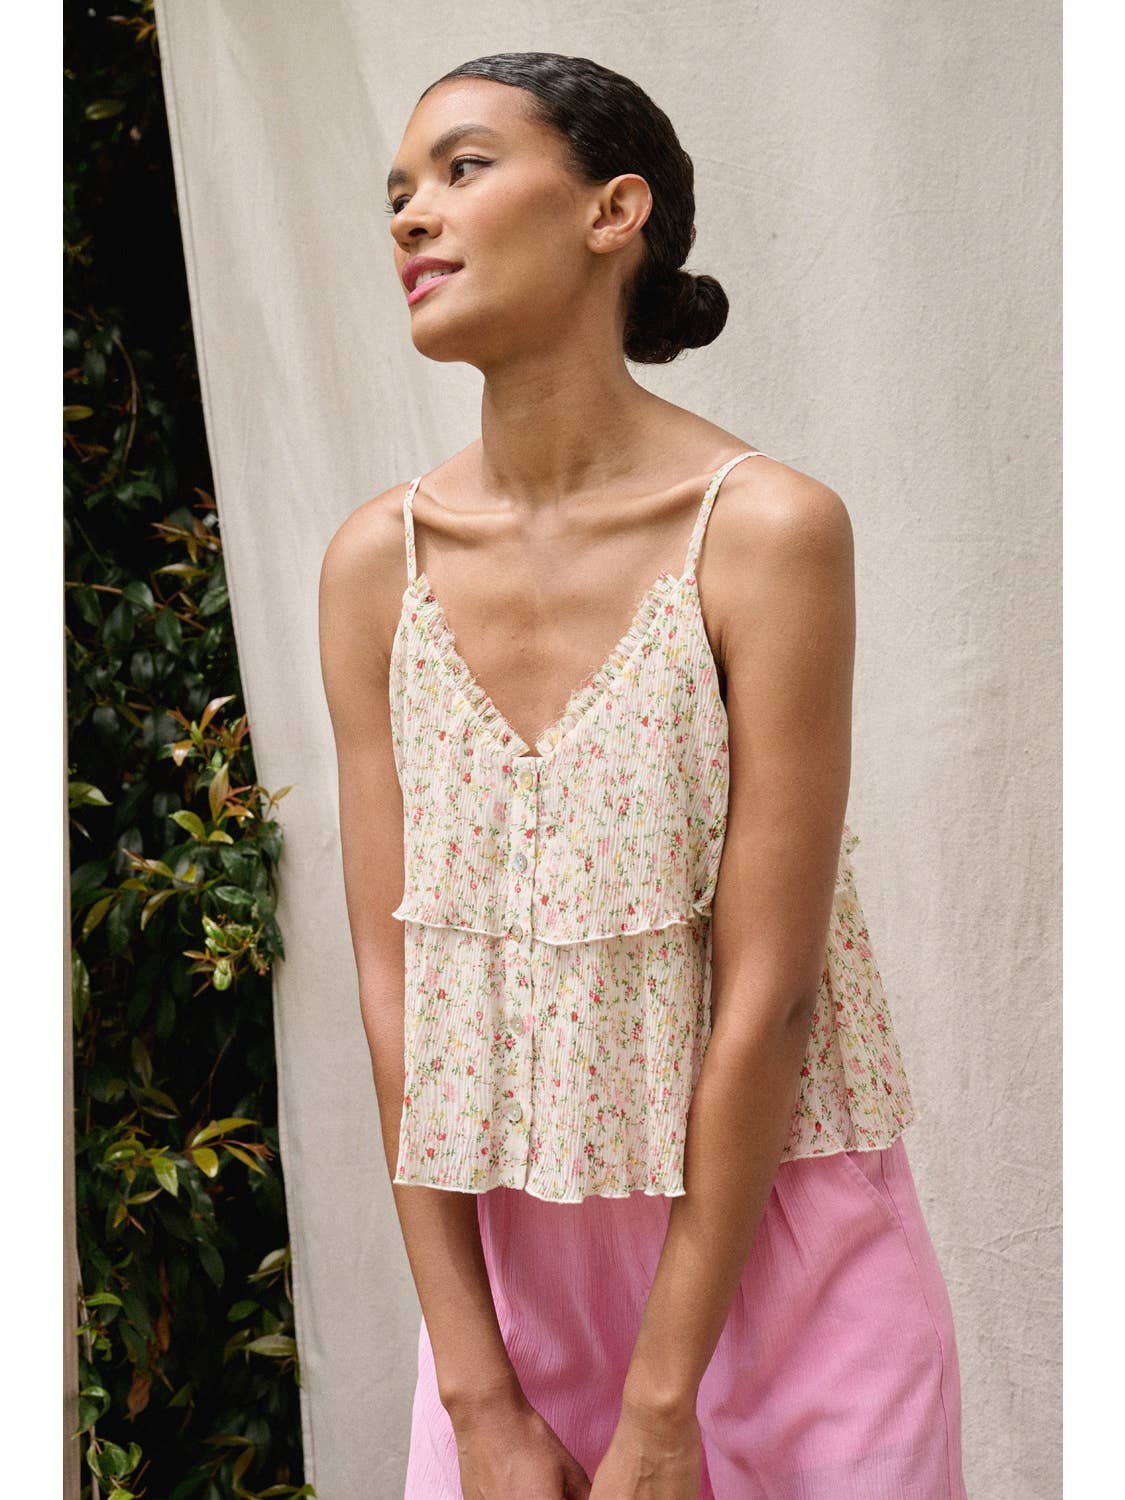 Floral Sweetheart Flounce Ruffle Camisole Top